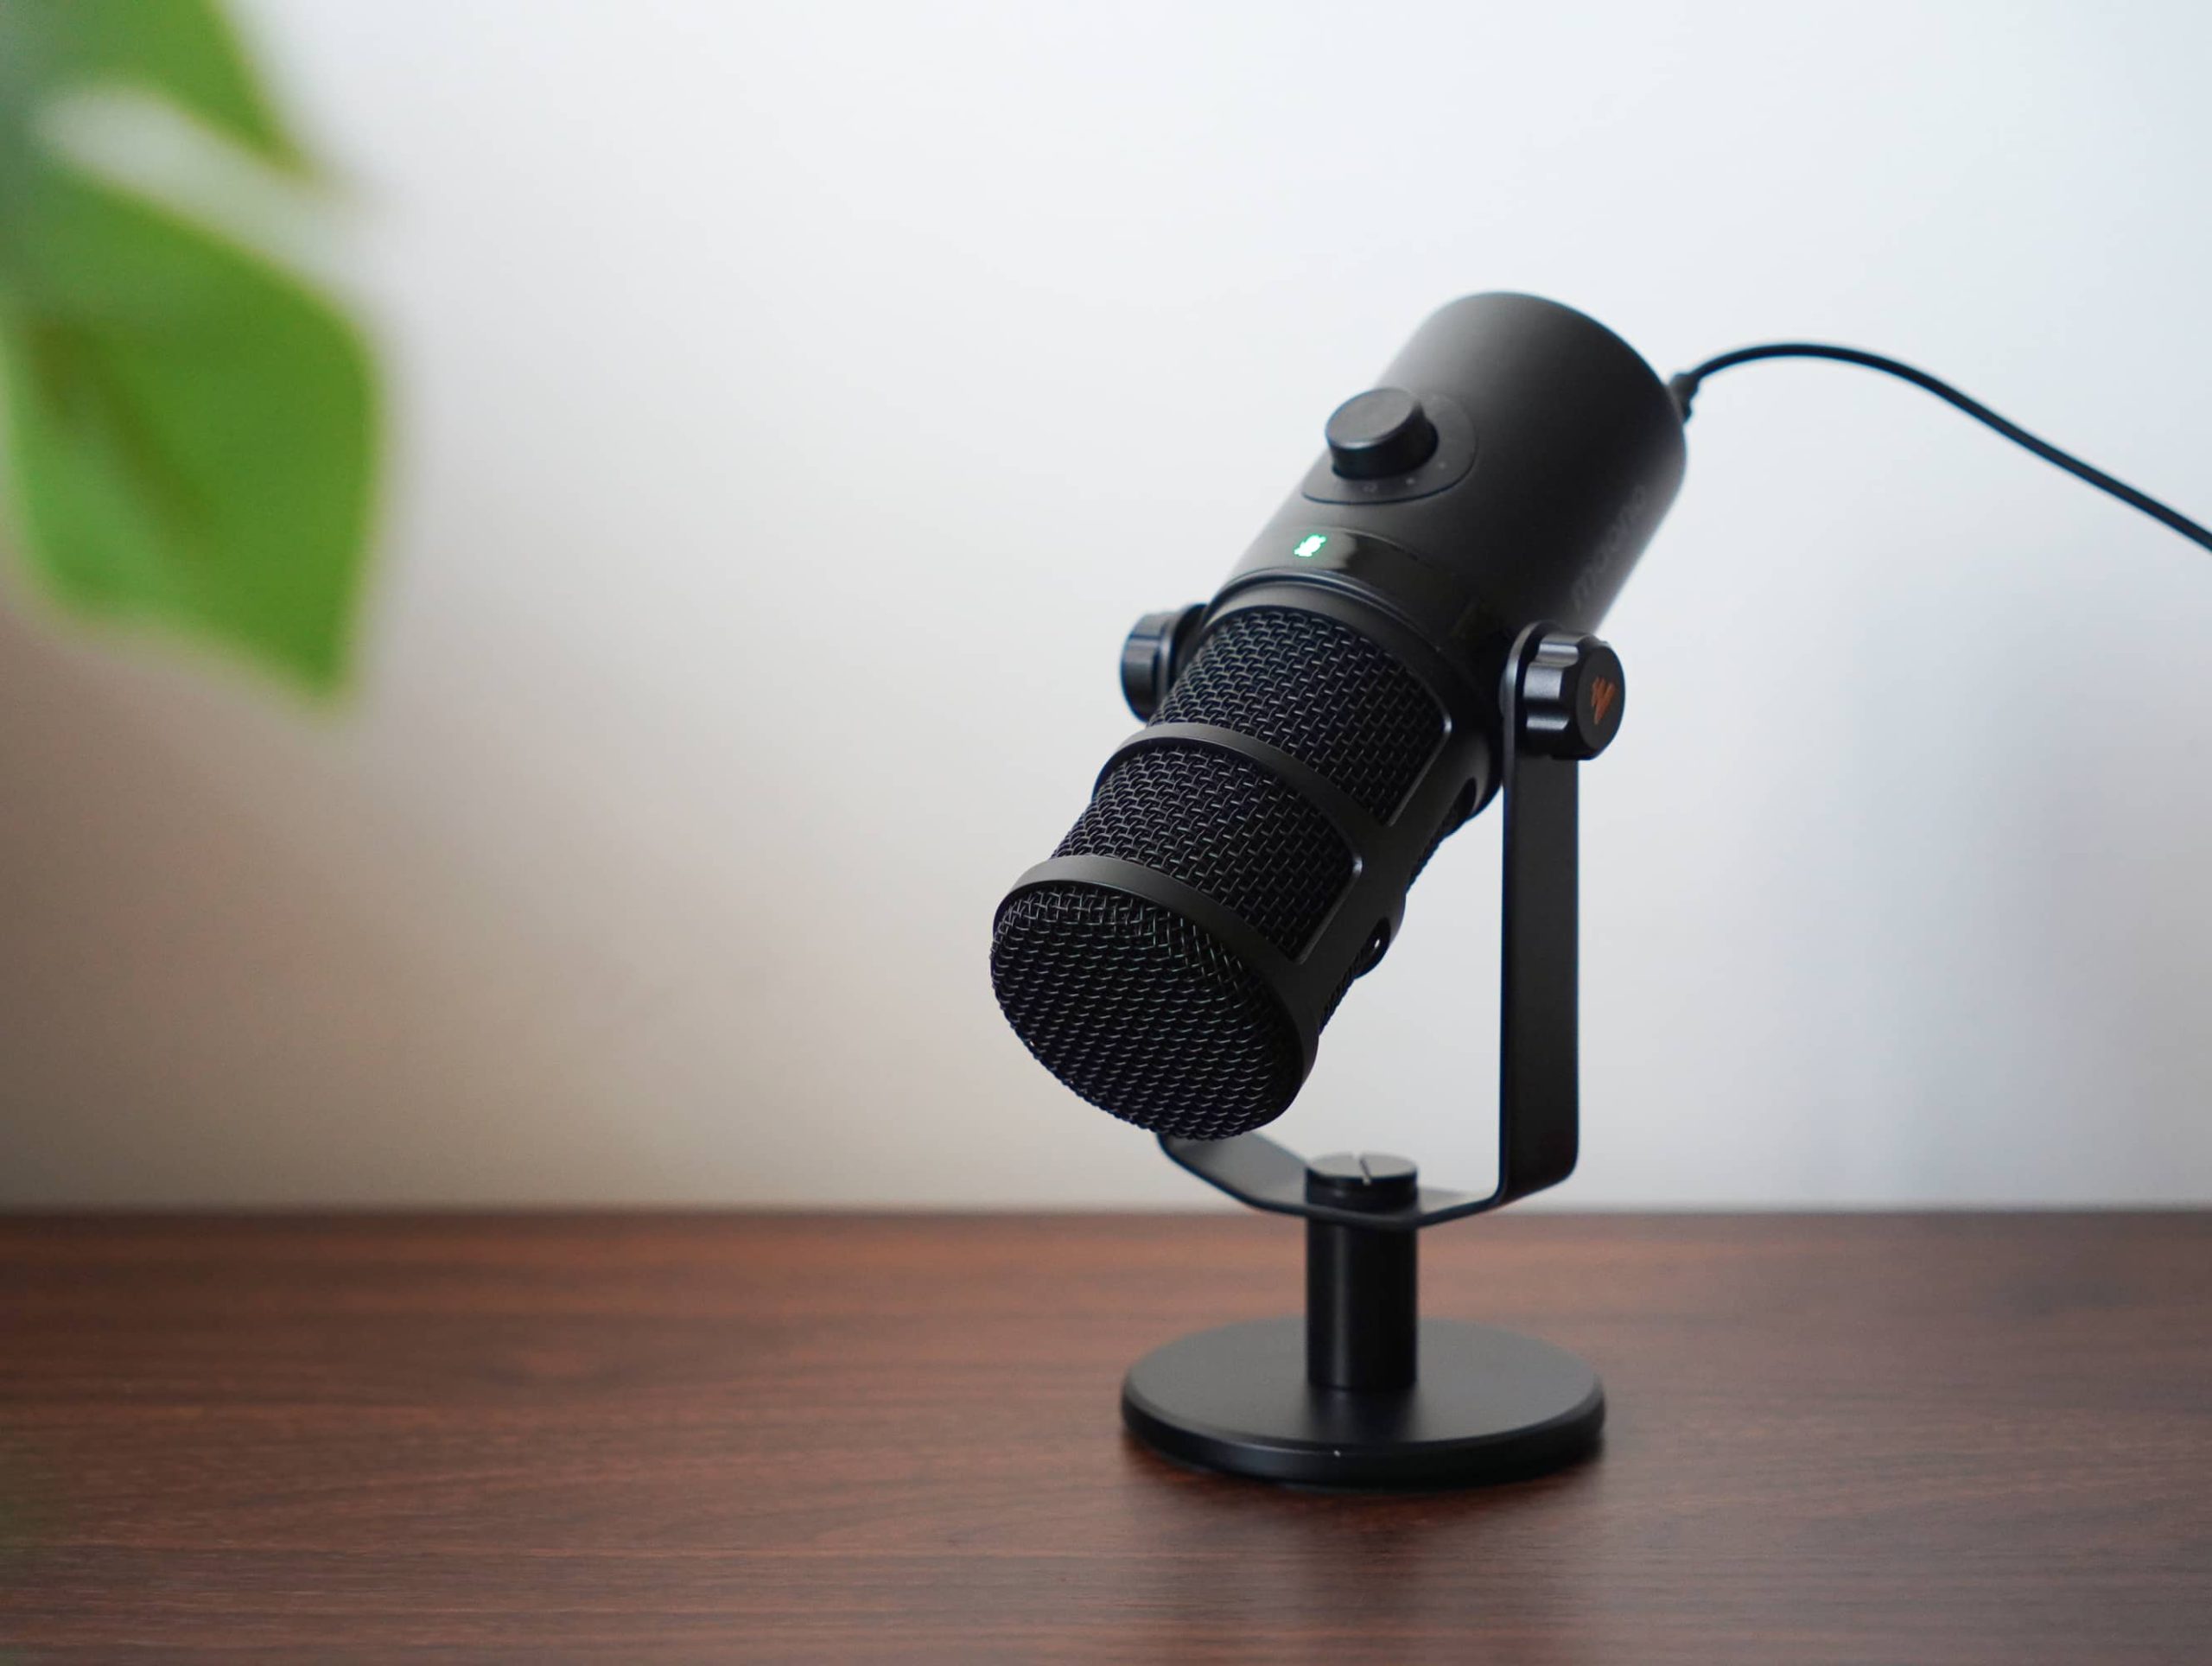 Maono PD400X Review - Every Mic You Could Ever Need 